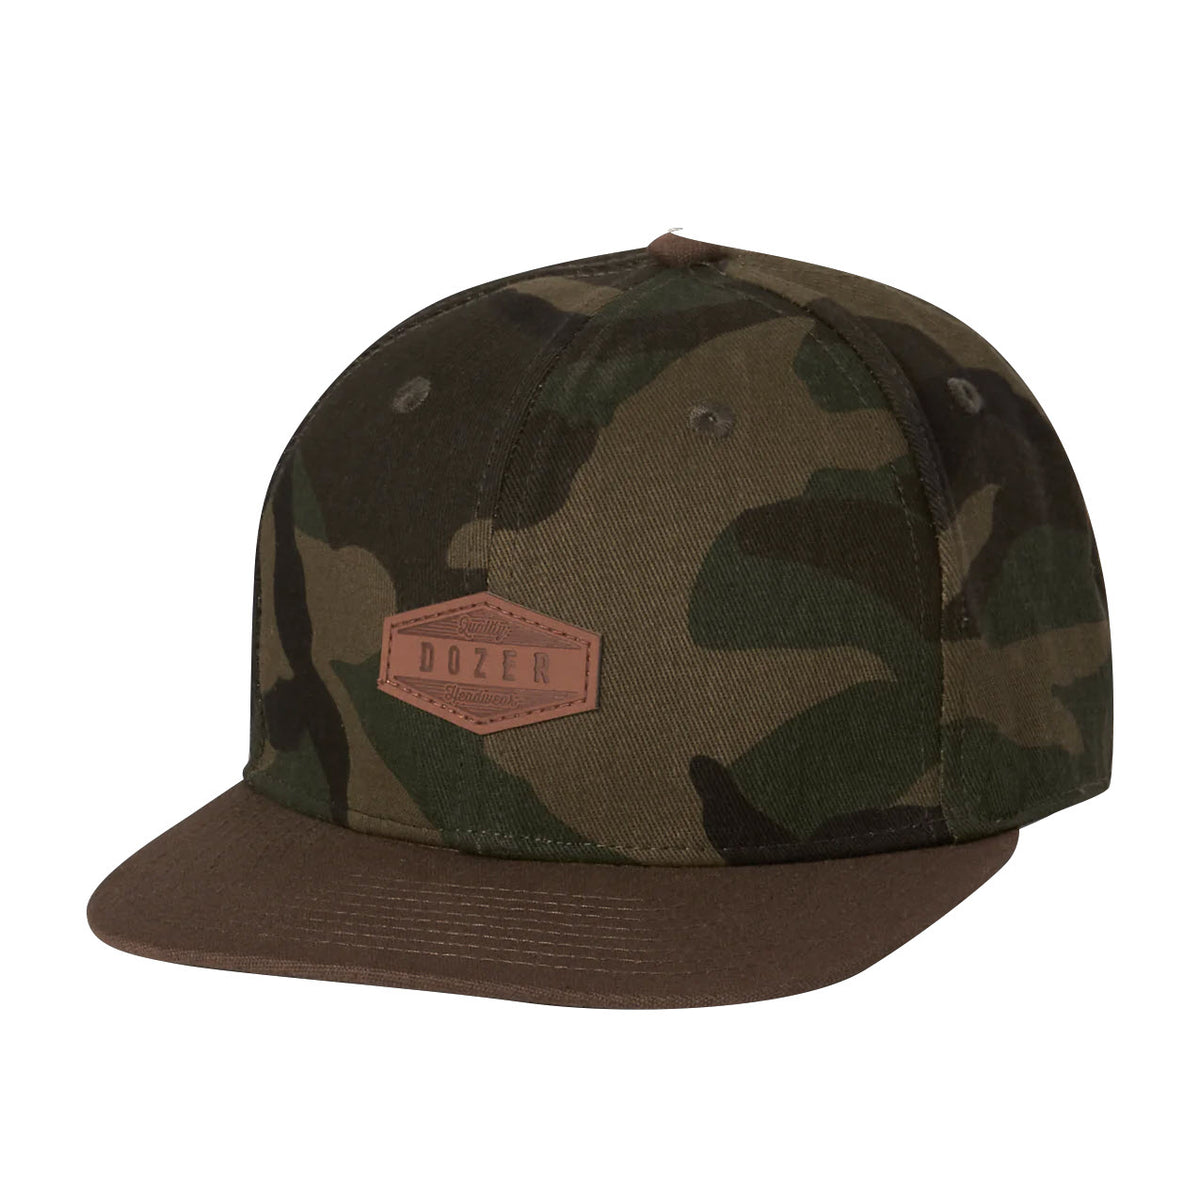 Flat-brimmed camouflage cap with a faux leather Dozer patch on the front, isolated on a white background. - 
DOZER KRISTIAN TRUCKER HAT CAMO by Millymook/Dozer